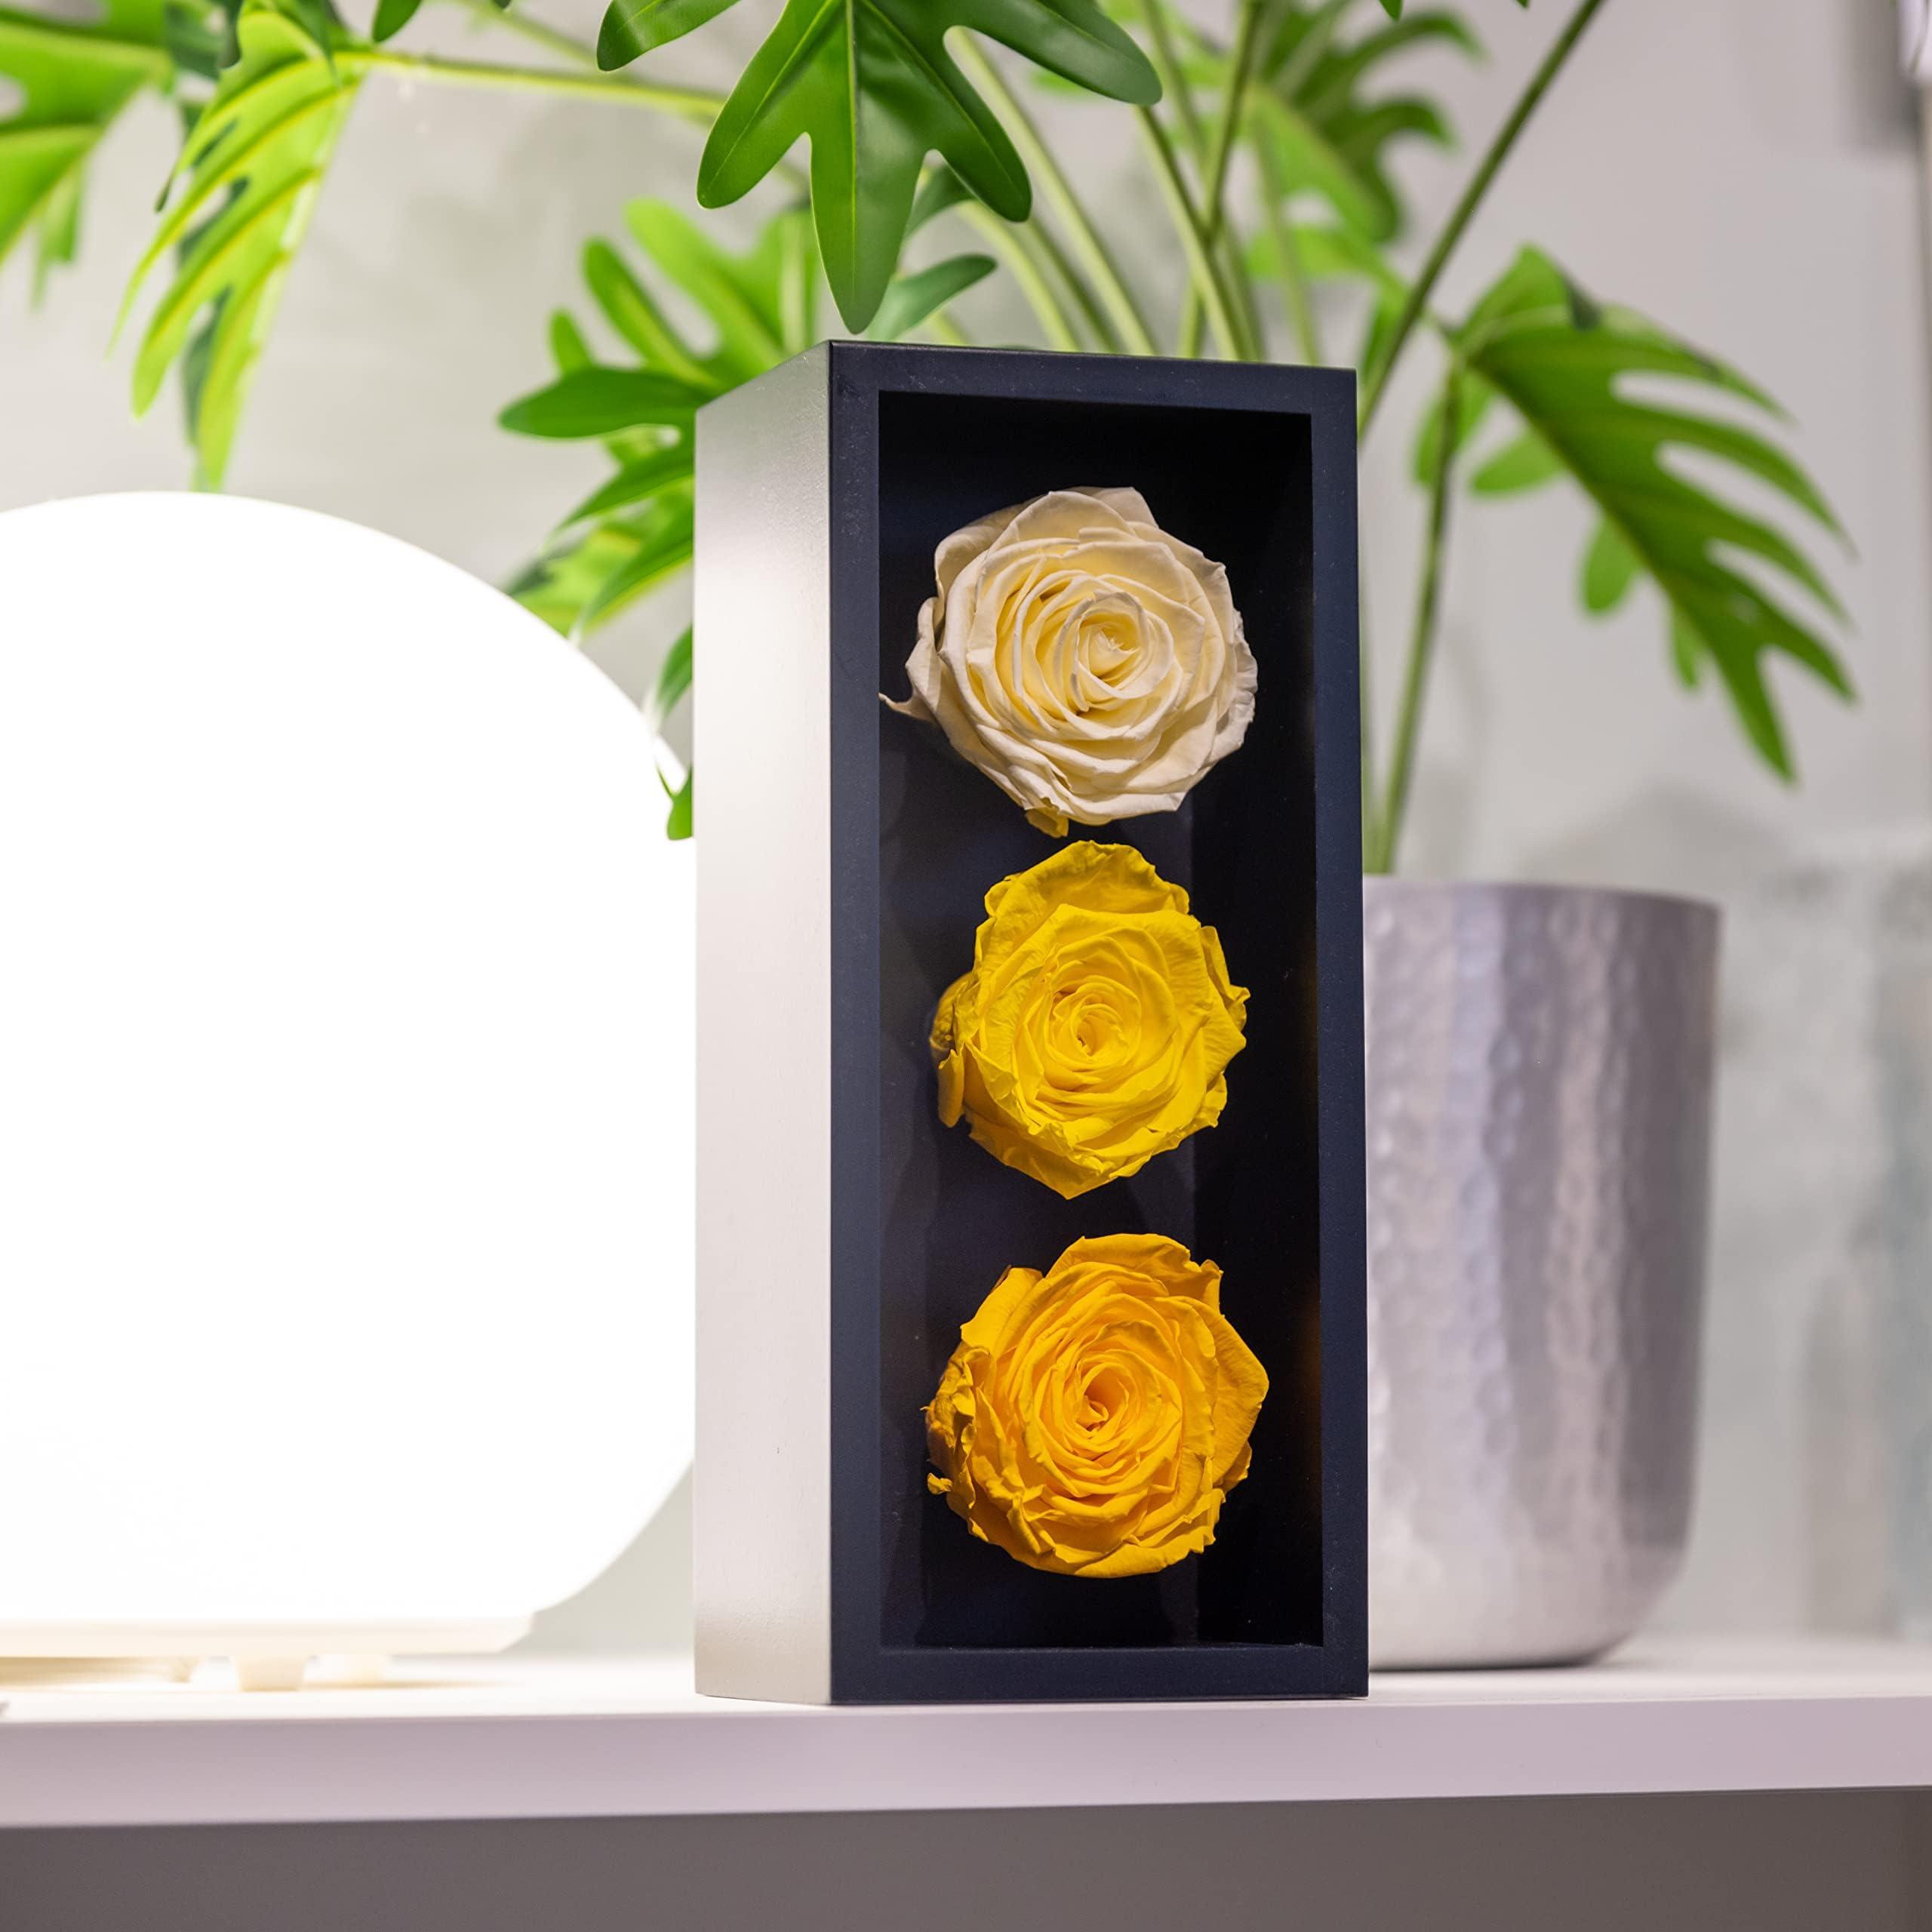 Khiva Graduation Preserved Roses in Wood Box, 3 Yellow Birthday Flowers for Delivery Prime, Everlasting Flowers, Natural Forever Roses That Last for Years, Eternal Rose, Gift Delivery for Mum 3